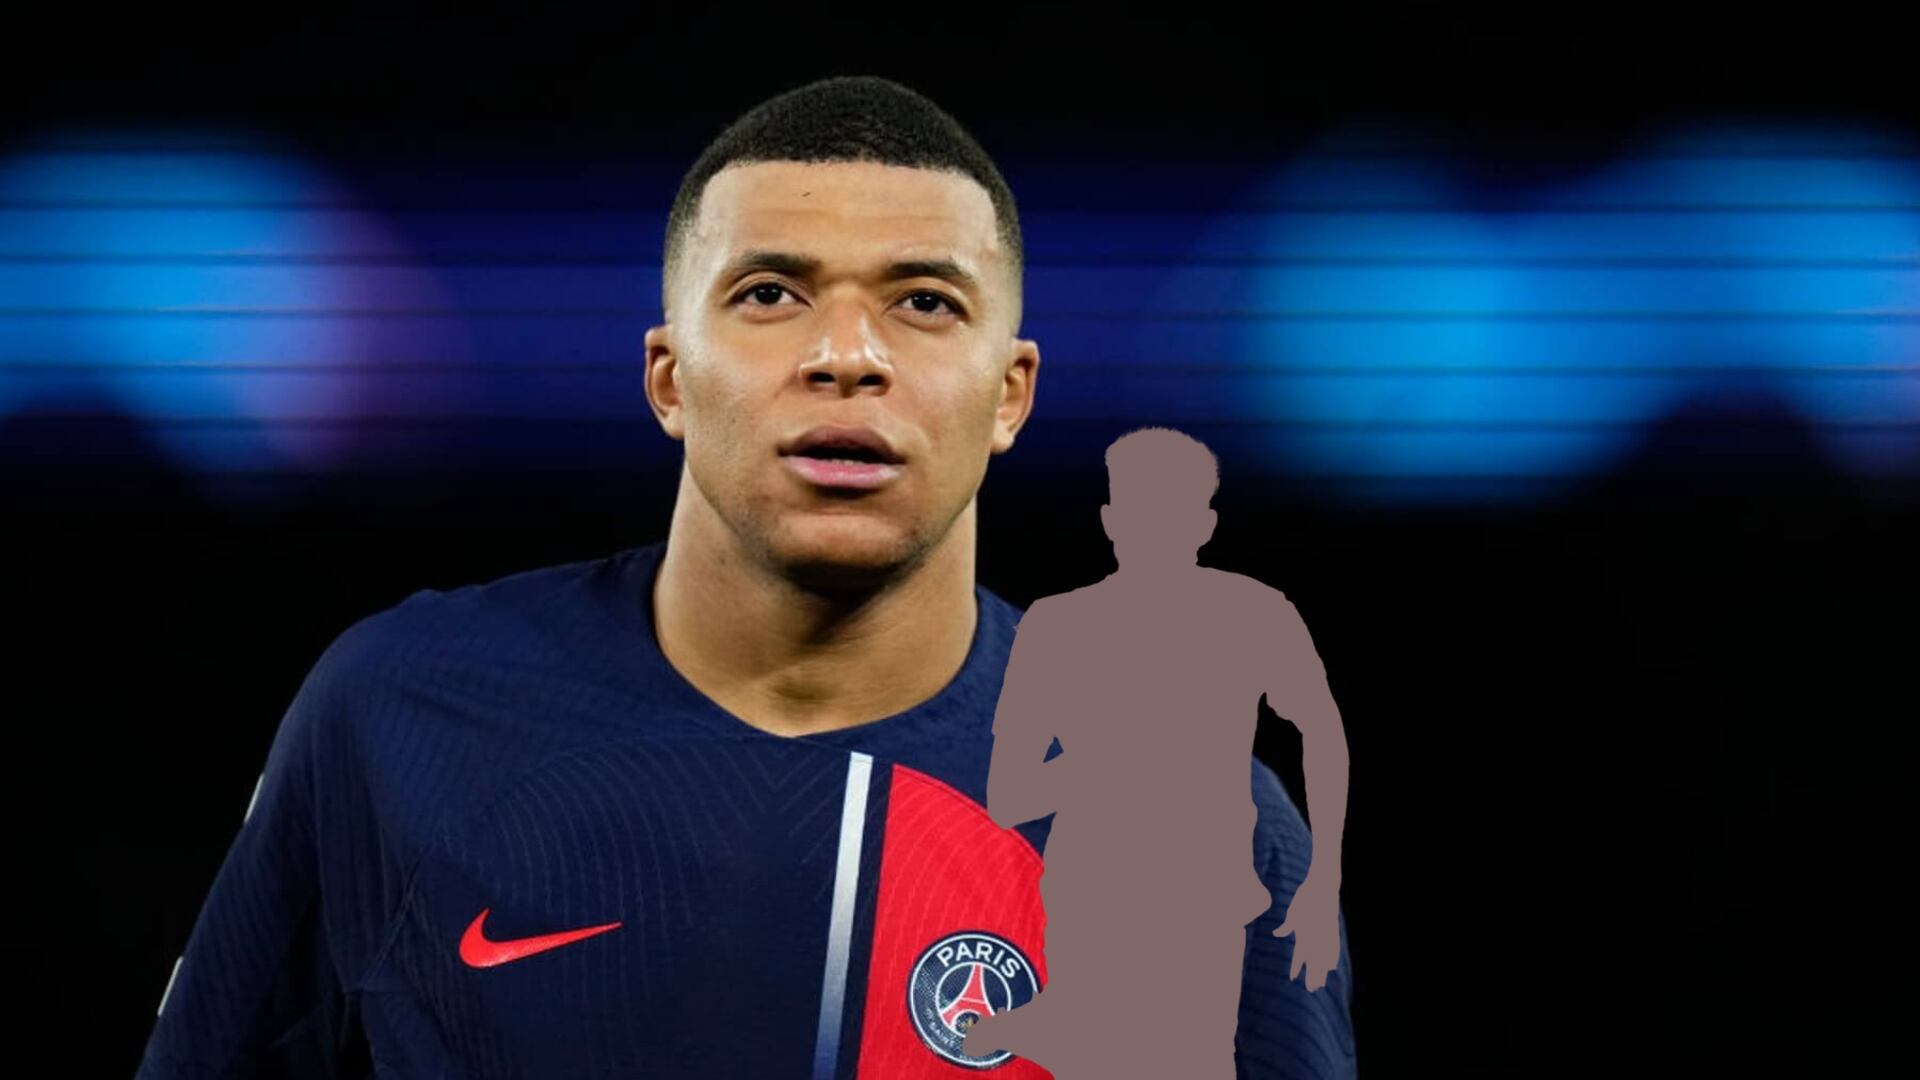 PSG still looking for Mbappé's replacement and Liverpool has the solution, for more than $80M, the star they would take